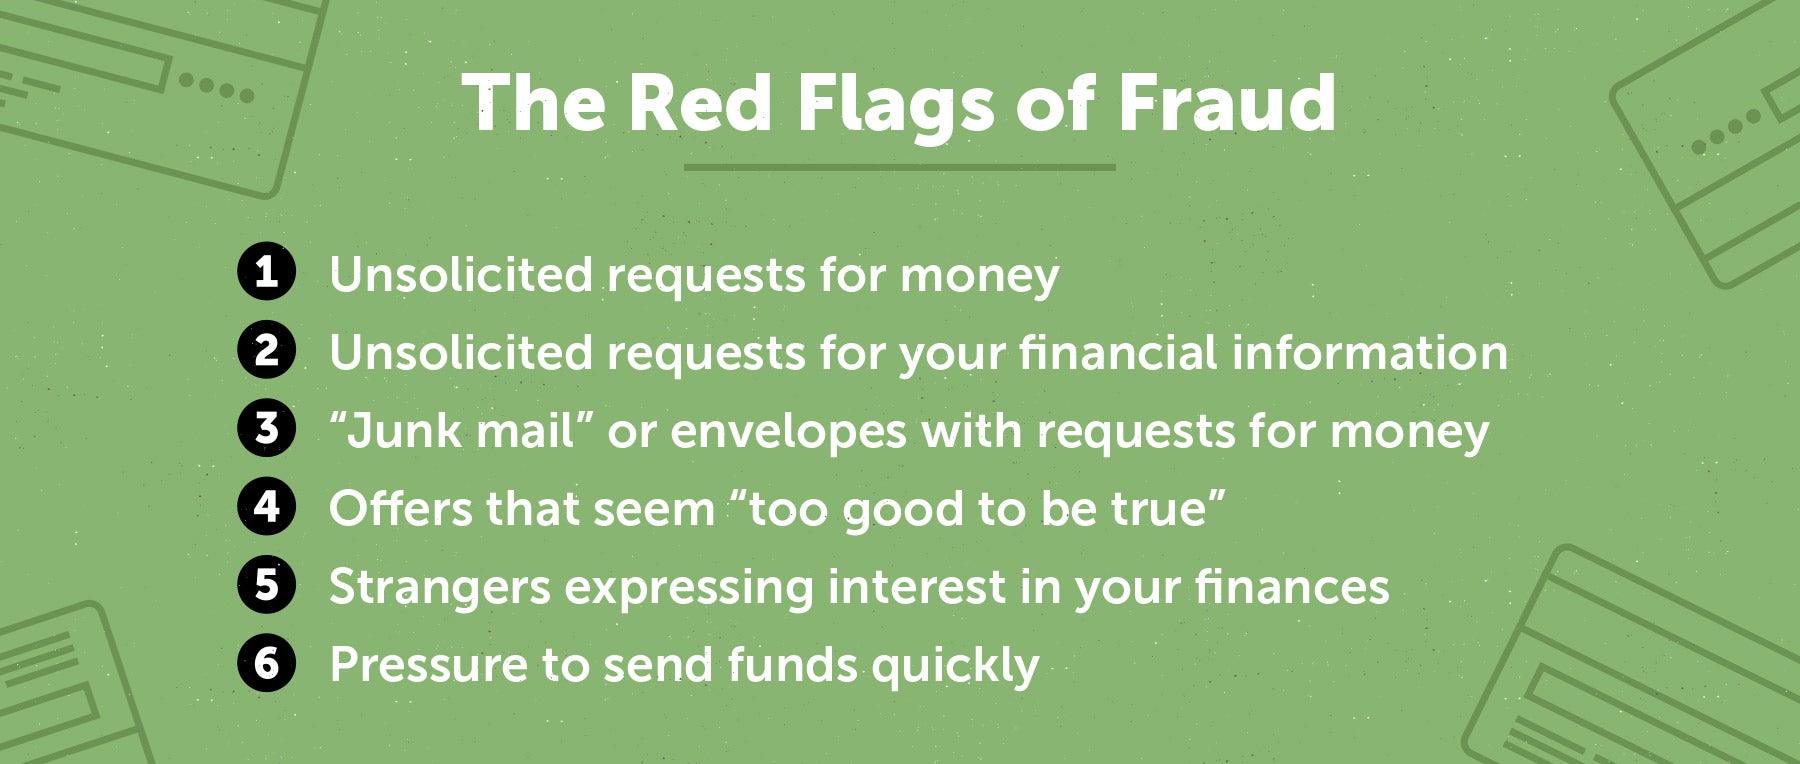 red flags of fraud